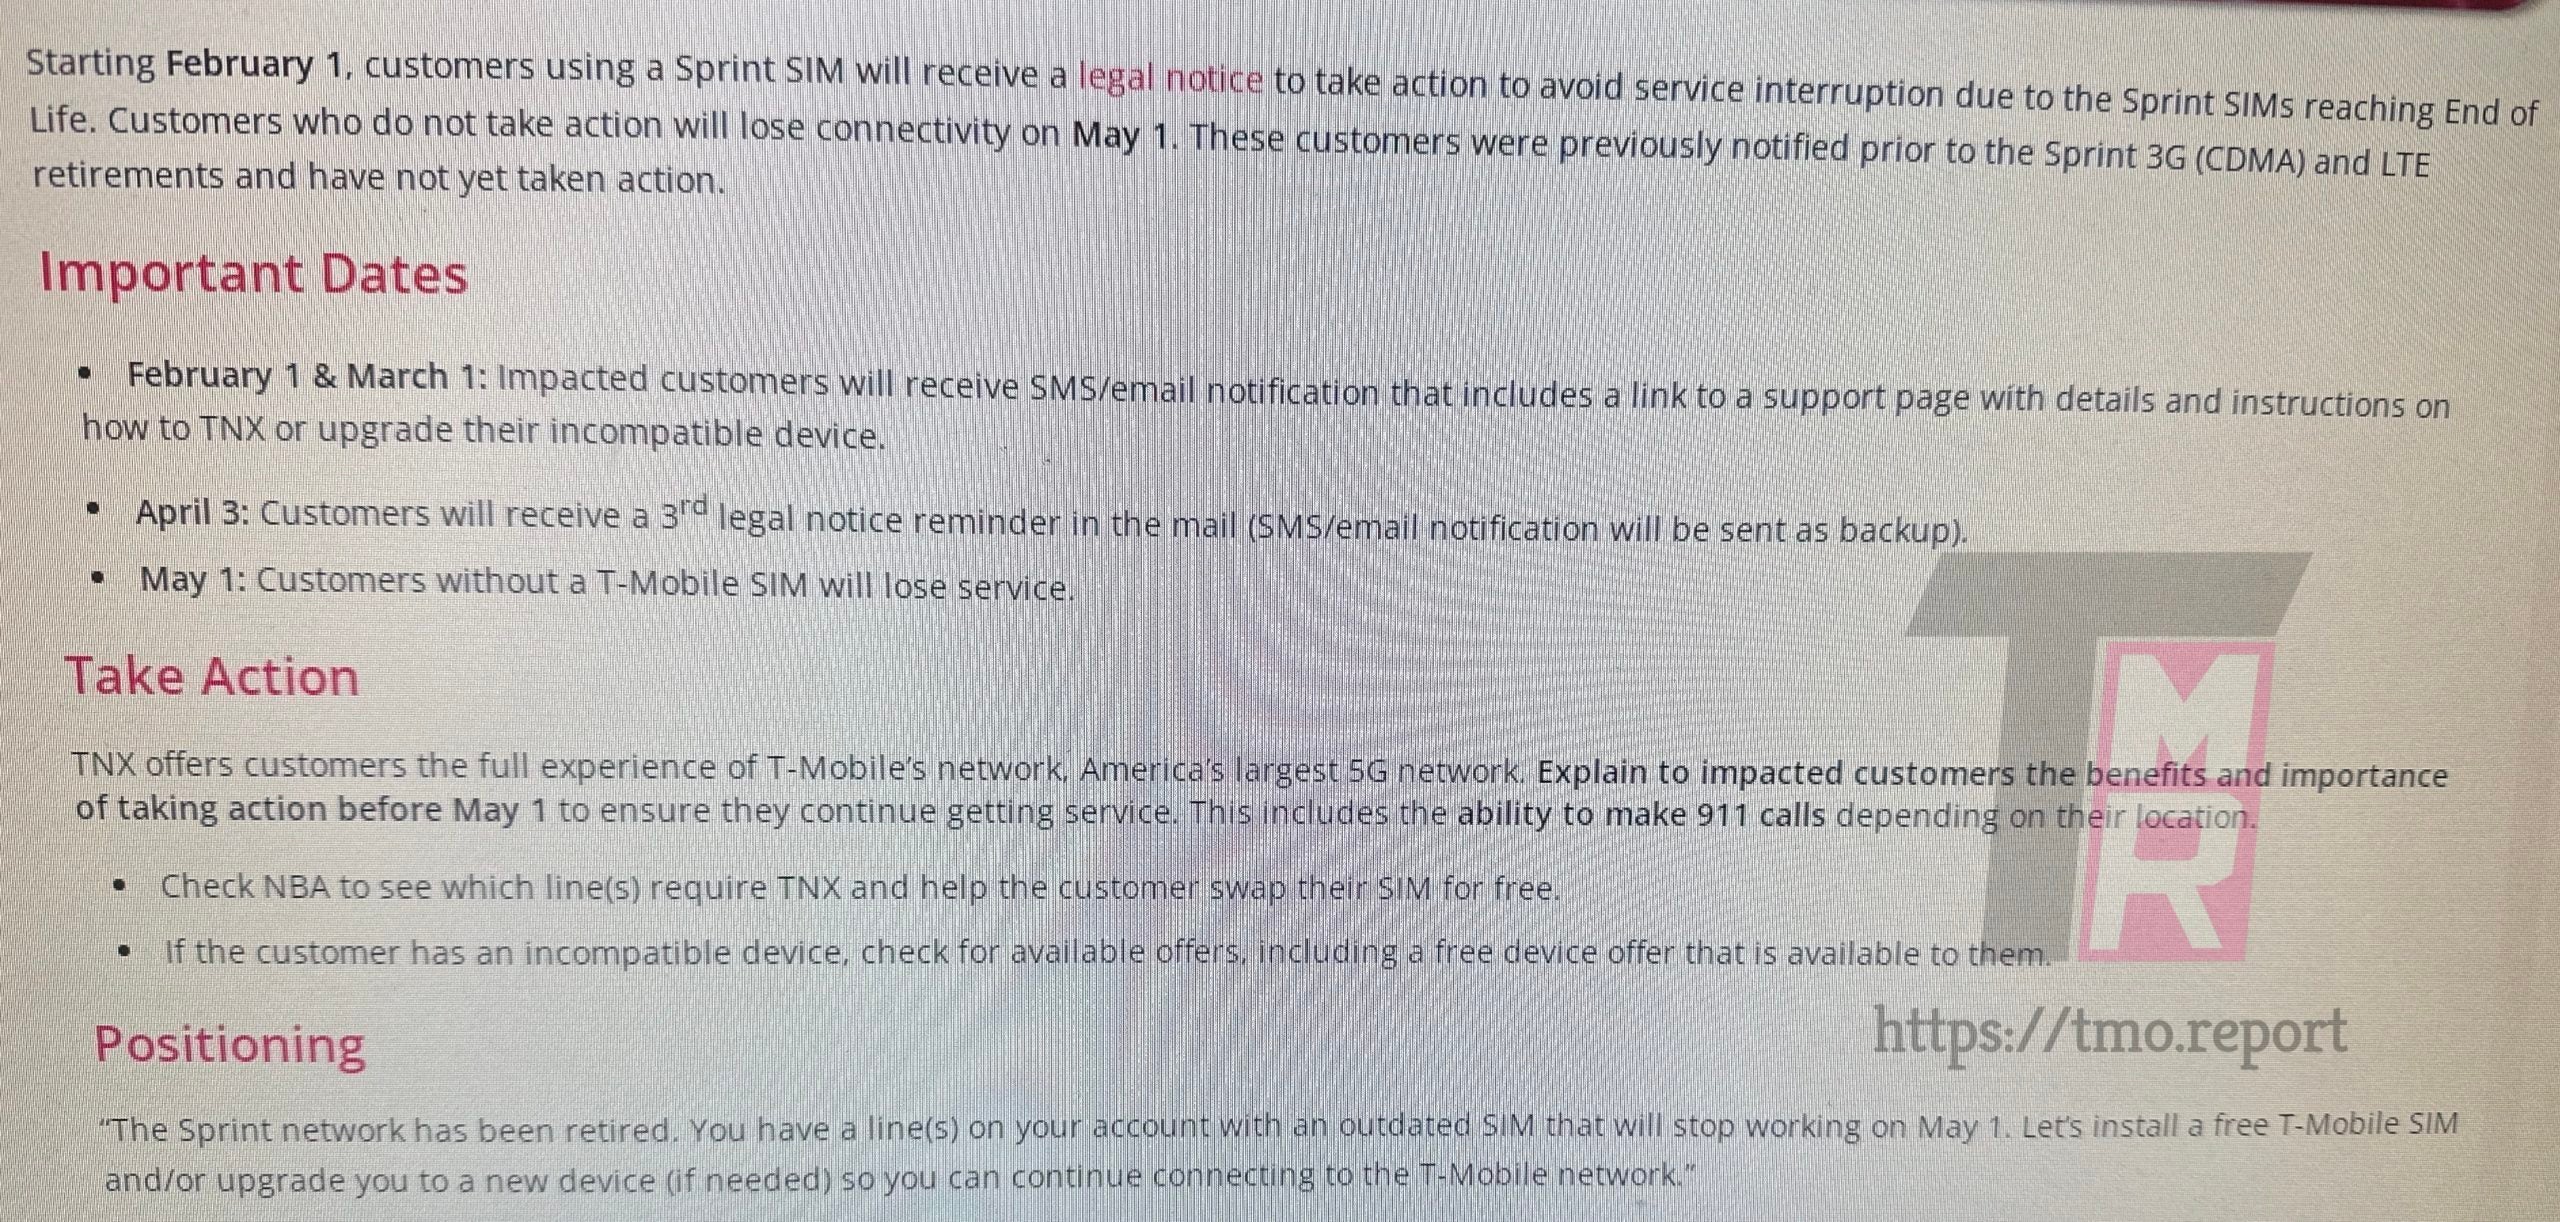 Source - The T-Mo - T-Mobile report reminds recalcitrant Sprint customers to upgrade to a T-Mobile SIM card by May 1, otherwise